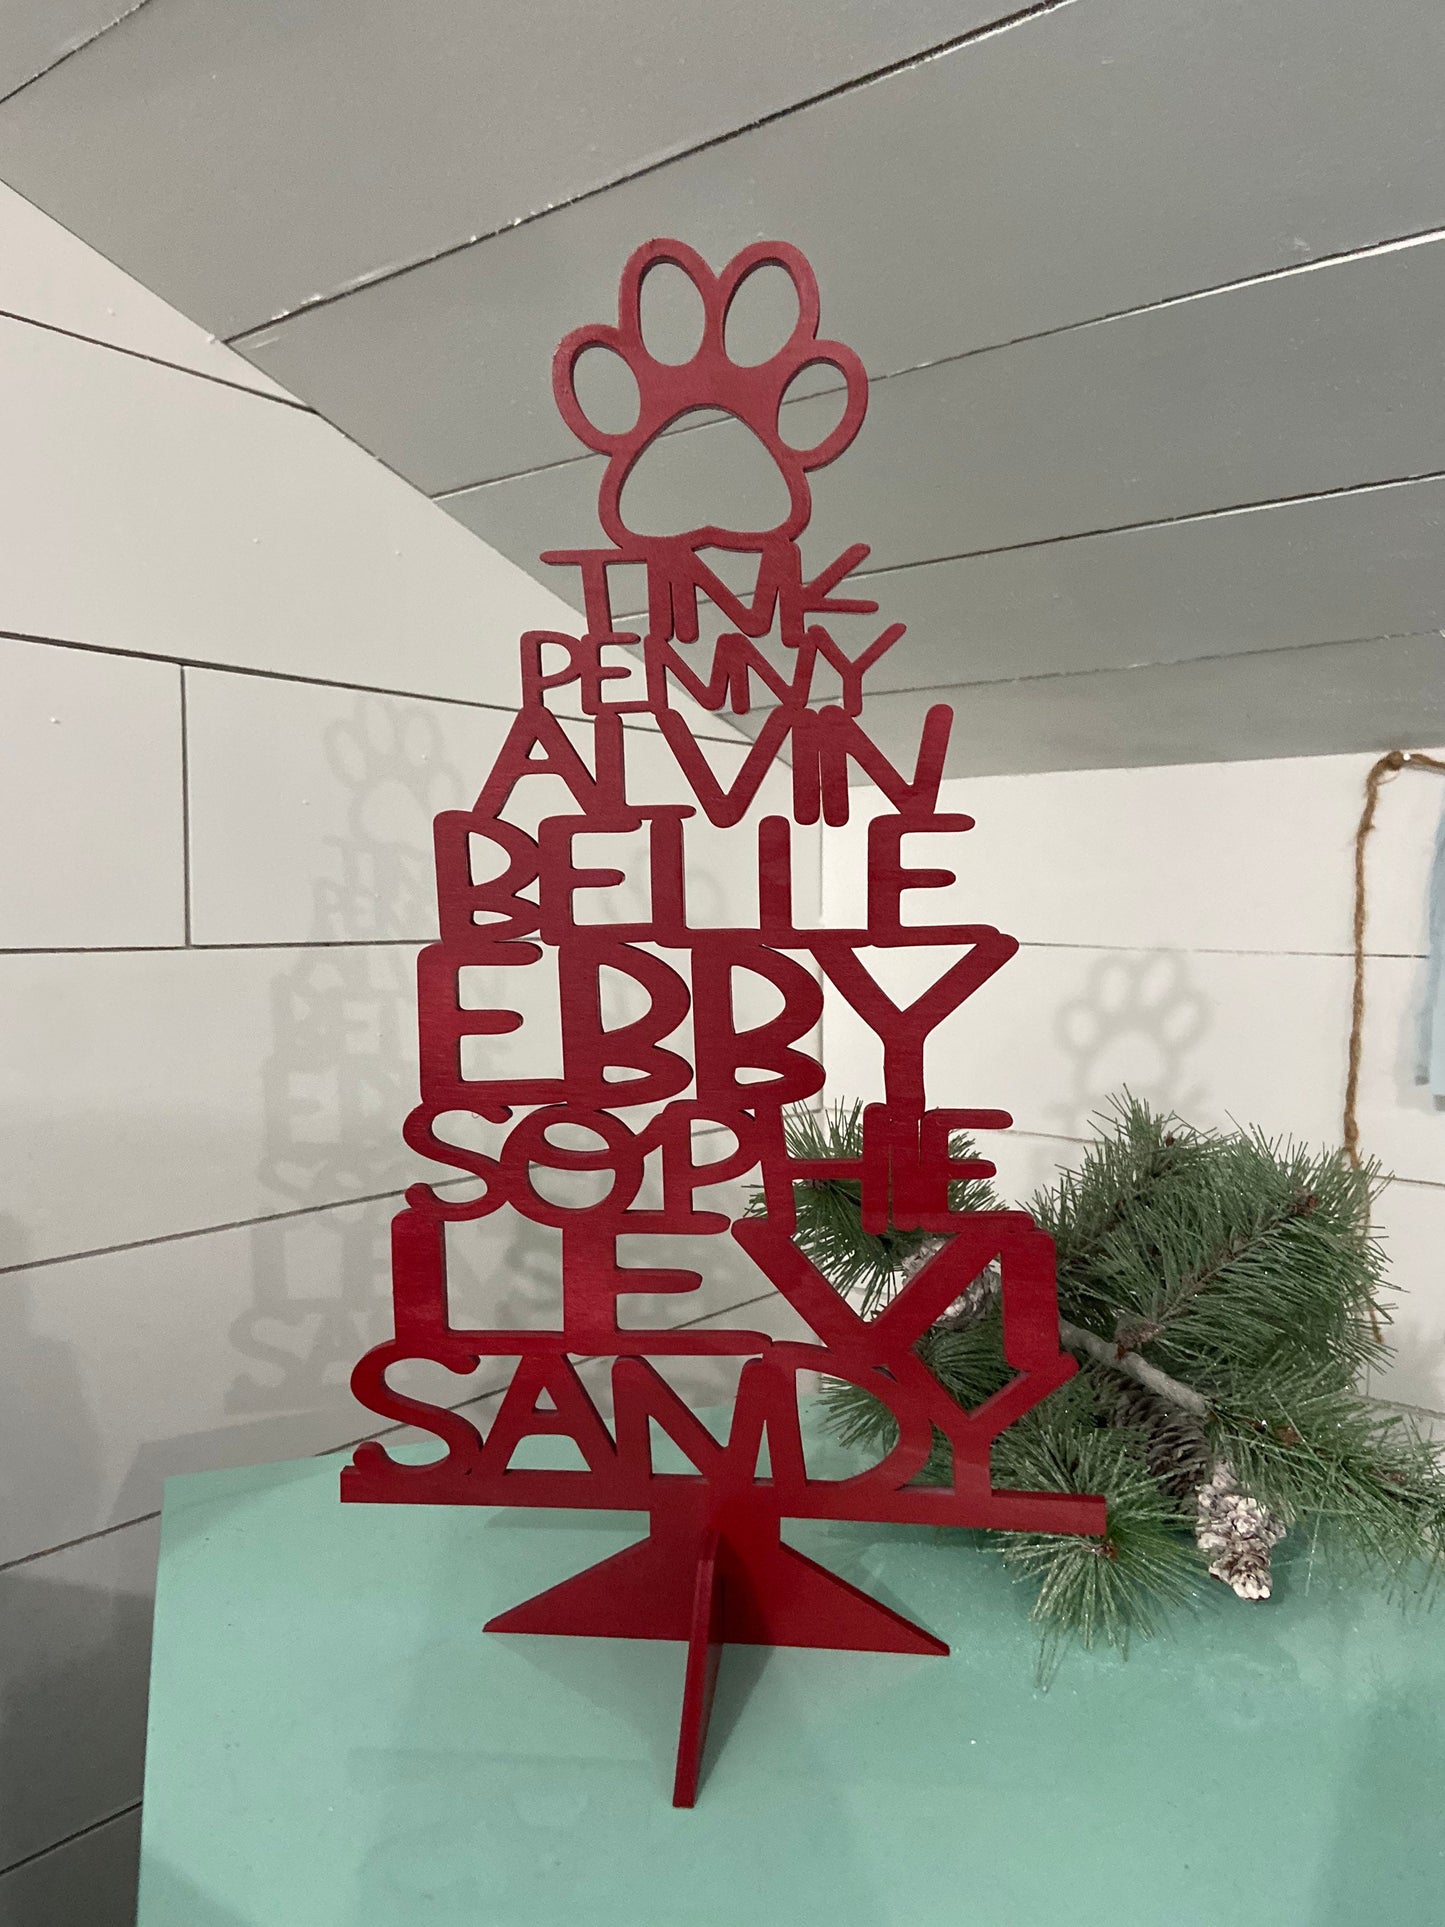 Grand Puppy, Dog, Cat, Christmas Tree Personalized with Names, Pets Names Tree, Gift for Grandma, Gift for Grandpa [FREE SHIPPING]